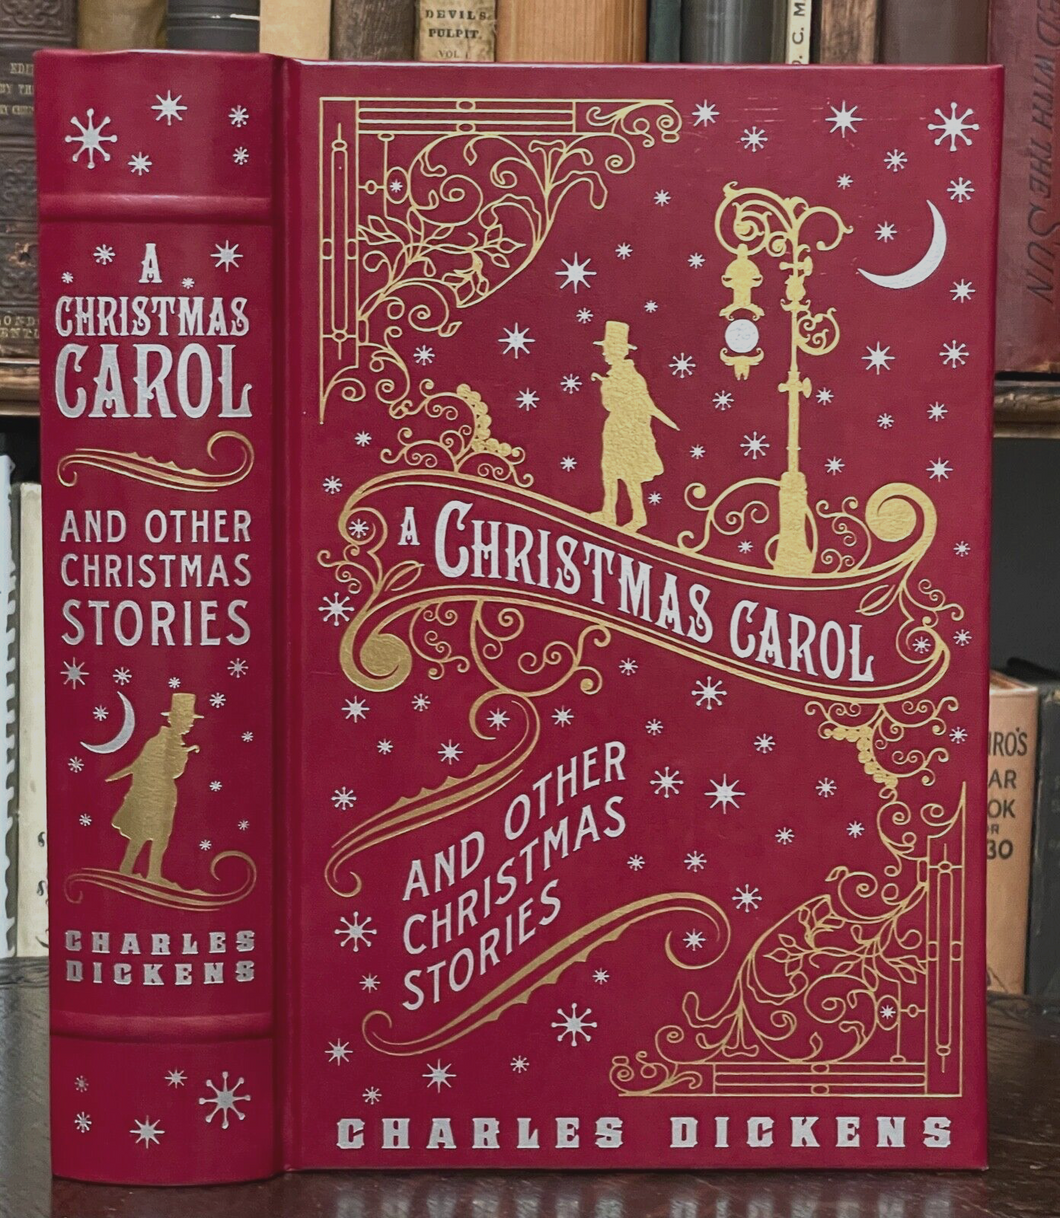 CHRISTMAS CAROL AND OTHER STORIES - Dickens - FULL LEATHER COLLECTOR ED, 2013